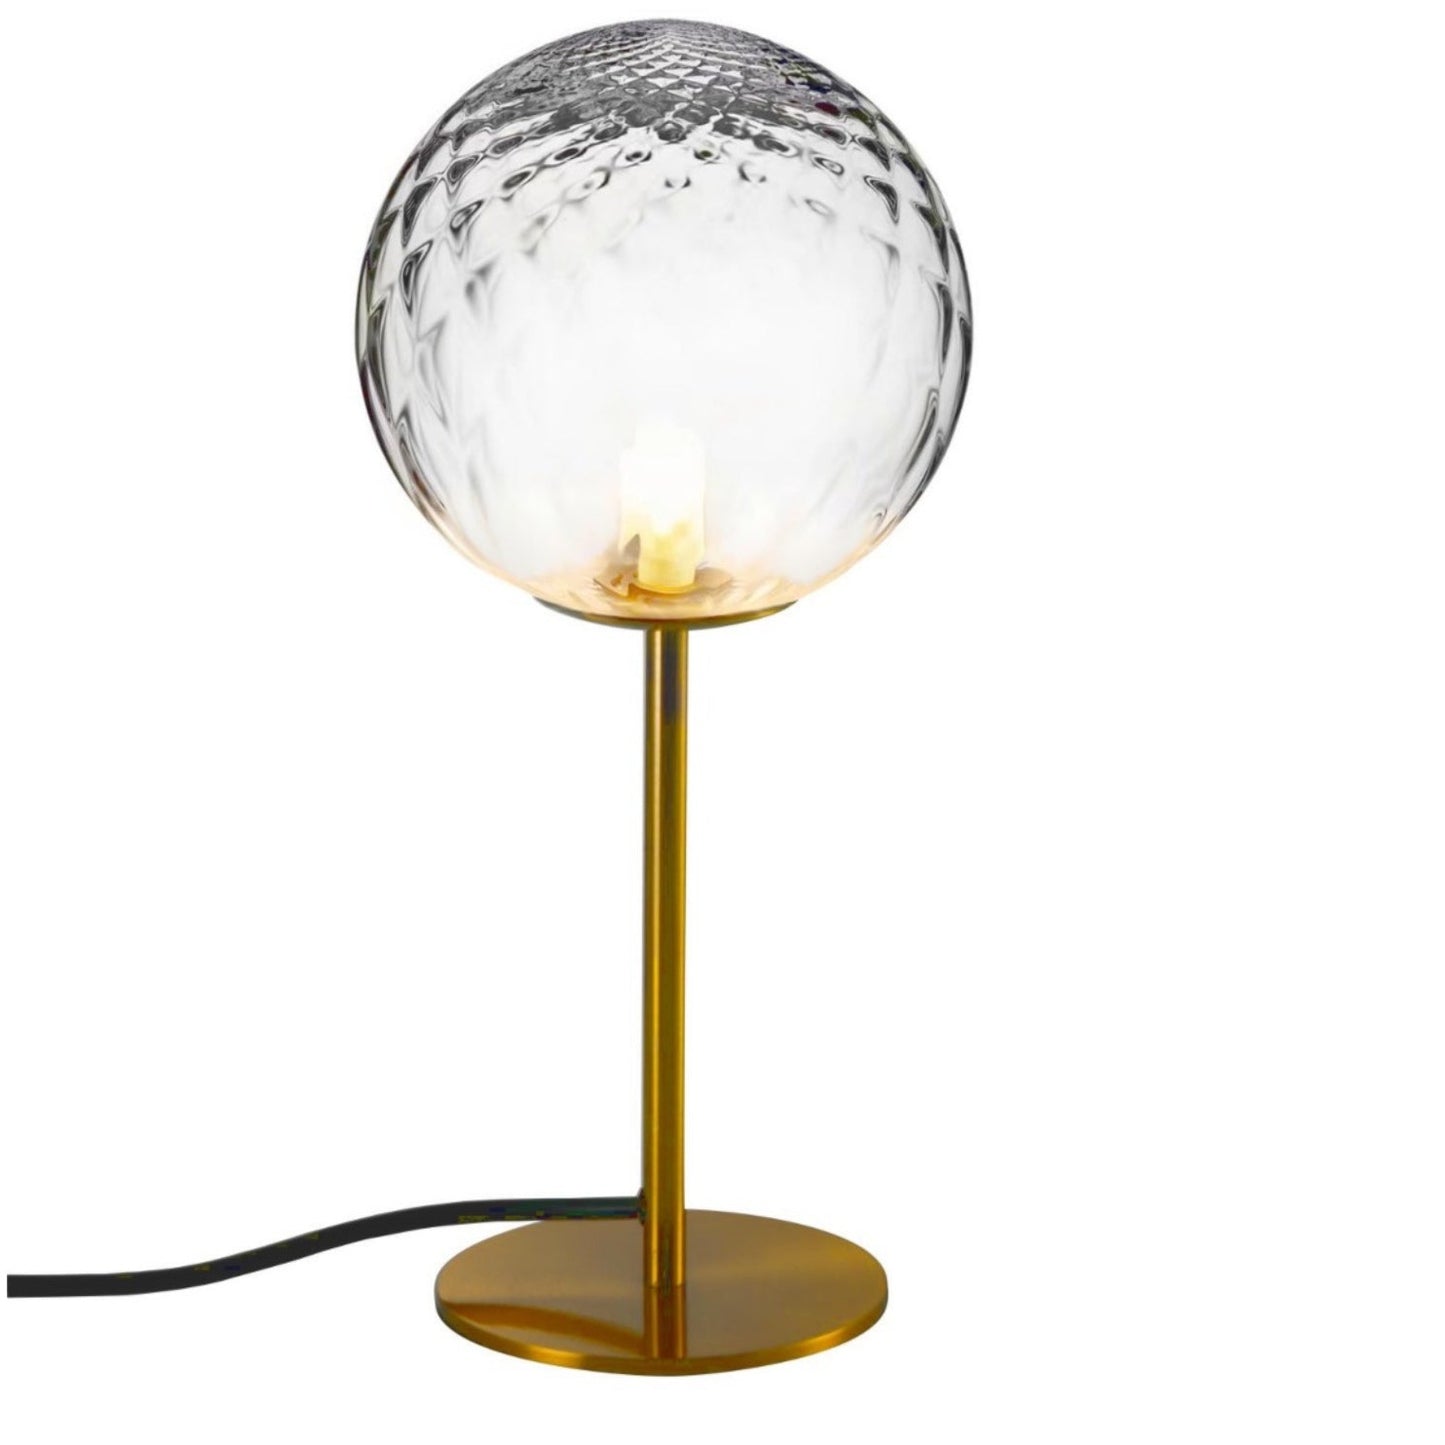 Introducing our Dixon table lamp with its elegant crystal and golden finish it will be sure to make a stylish addition to any living space. It features an ornate cut glass crystal globe design and is complimented by a brushed gold base that gives the light an undeniably luxurious style.